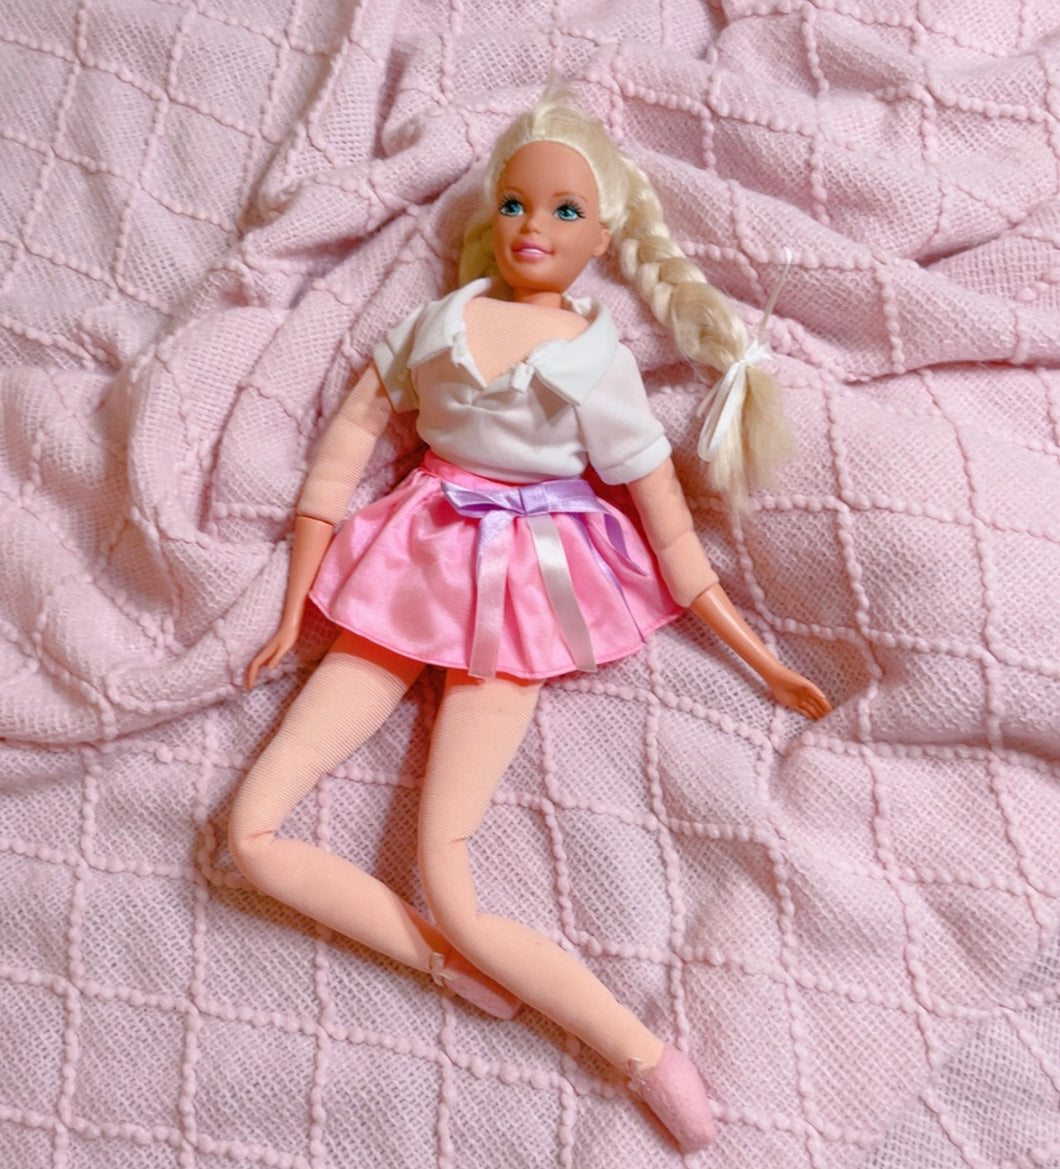 Slumber Party Barbie 1995 - vintage doll toy - soft body - 18” long !